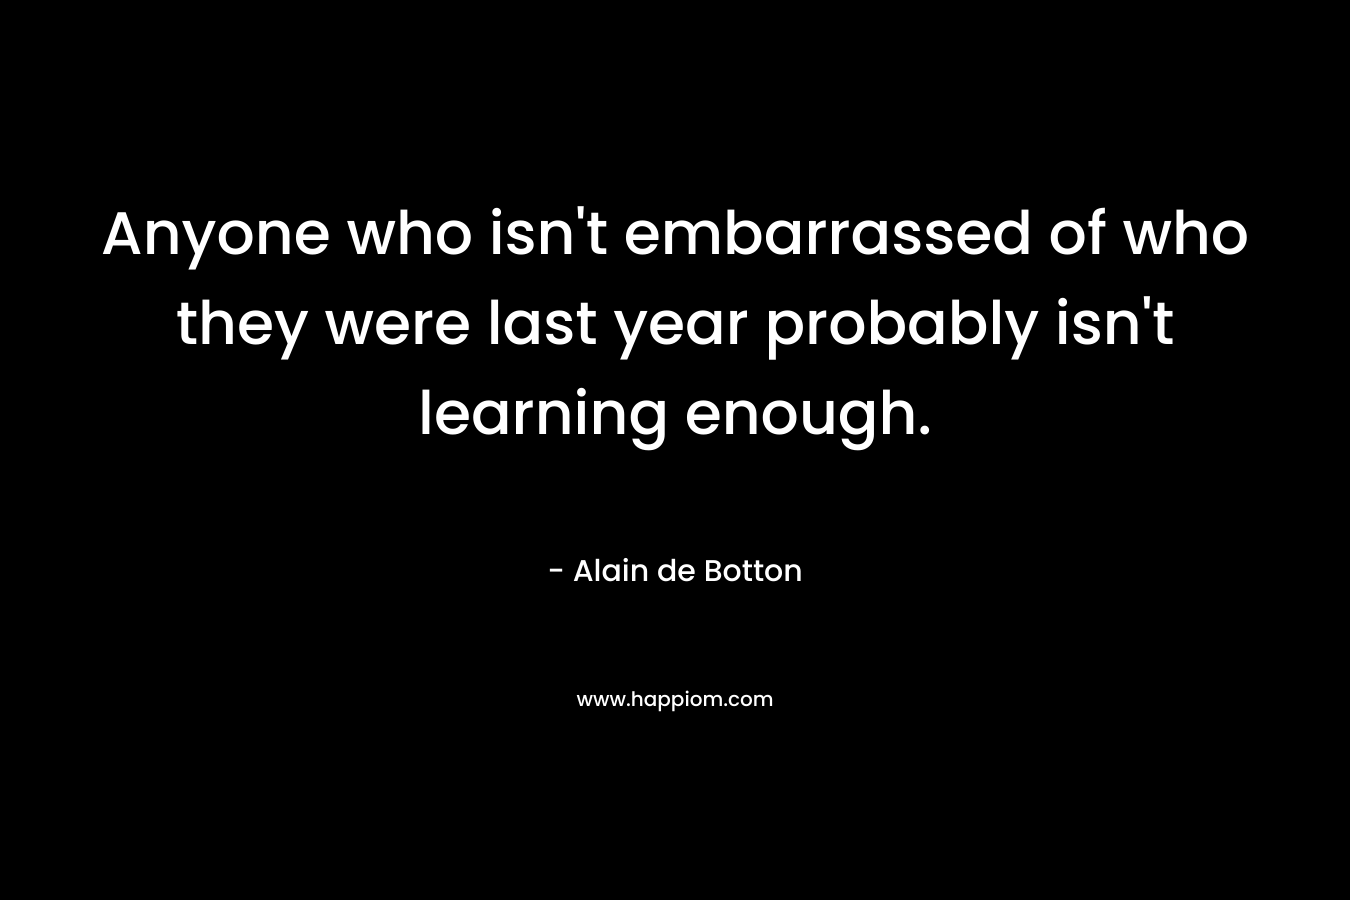 Anyone who isn’t embarrassed of who they were last year probably isn’t learning enough. – Alain de Botton